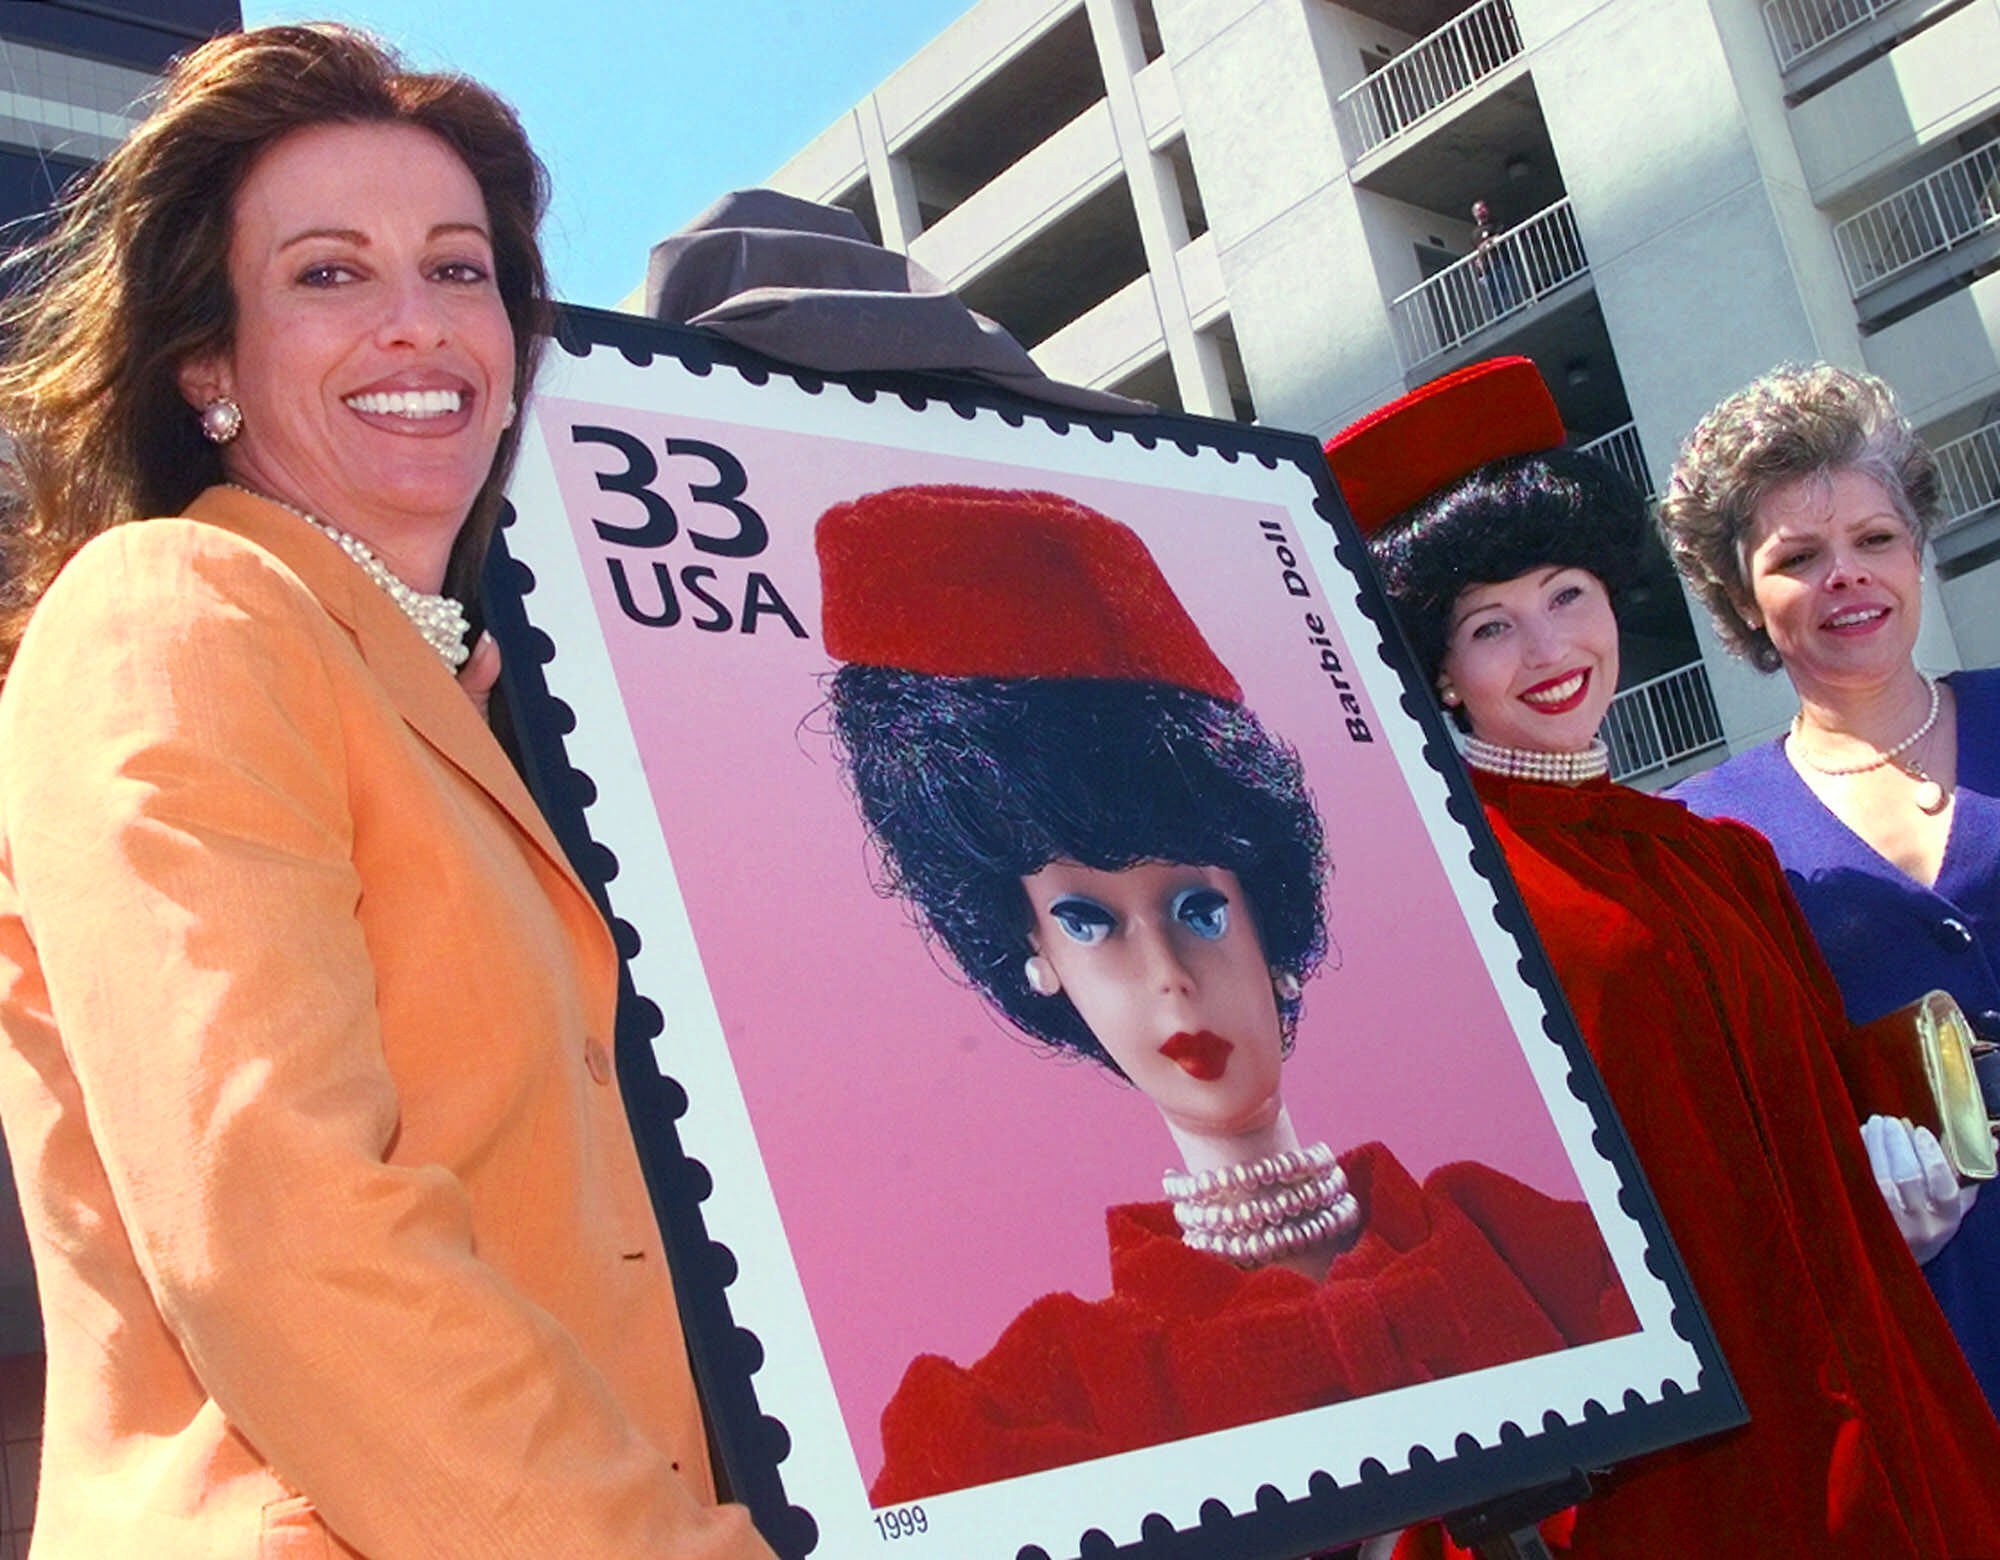 Jill Barad, left, chief executive officer of Mattel, Inc., poses with U.S. Postal Service consumer advocate Francia Smith, right, and actress Millicent Roberts as 